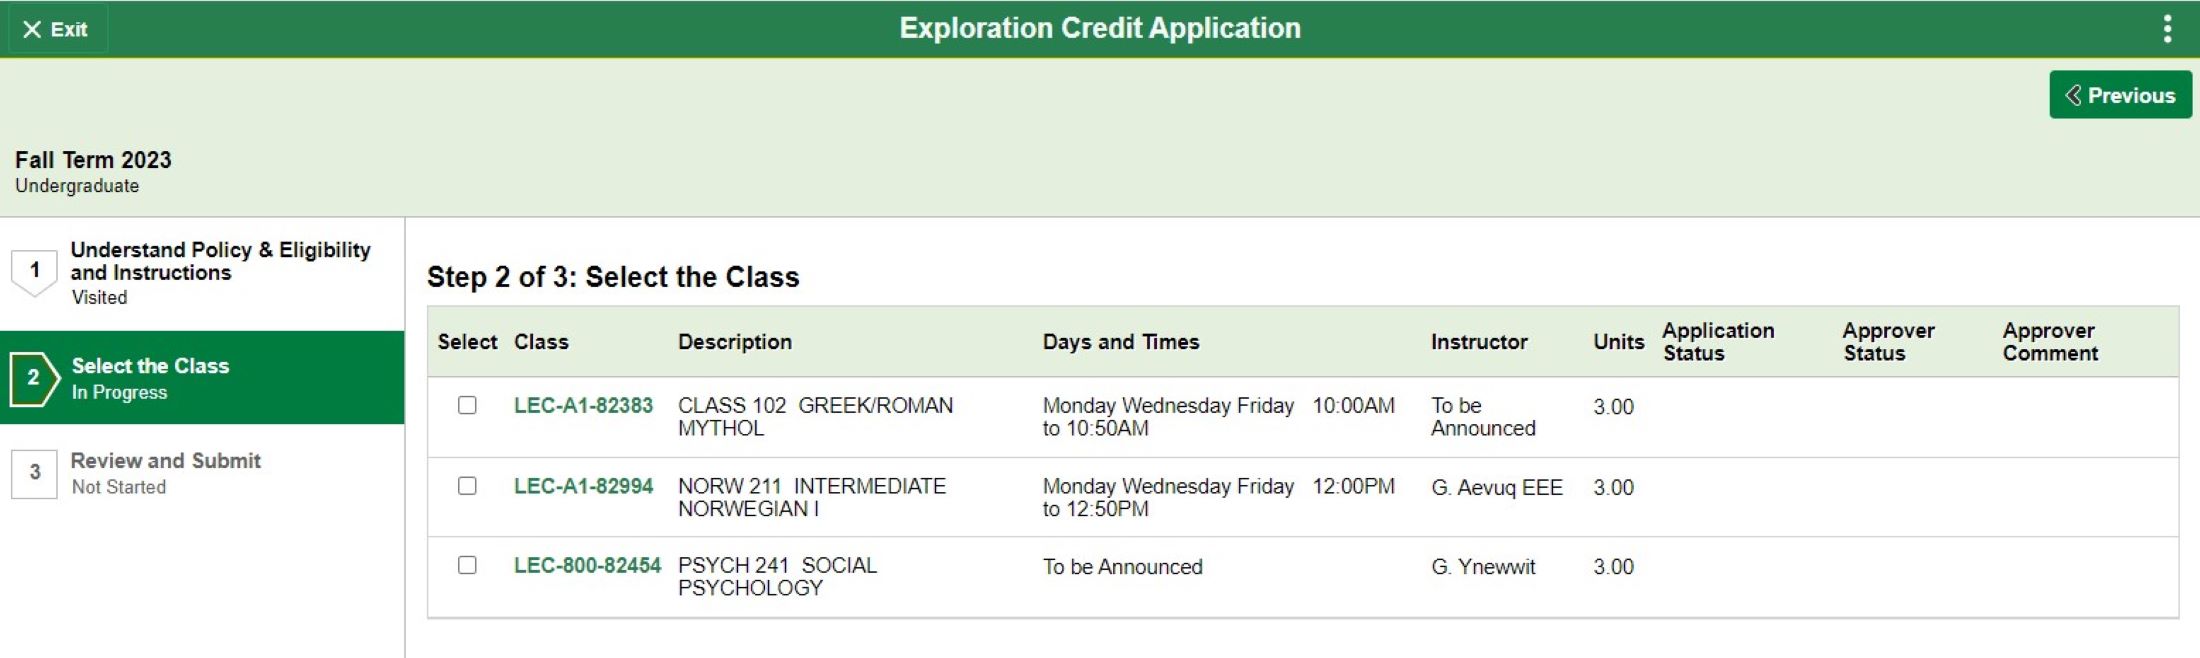 The Select the Class screen in the Exploration Credit Application. This example shows three class options with their descriptions, days and times, instructor, units, and blank colums for application status, approver status, and approver comment.